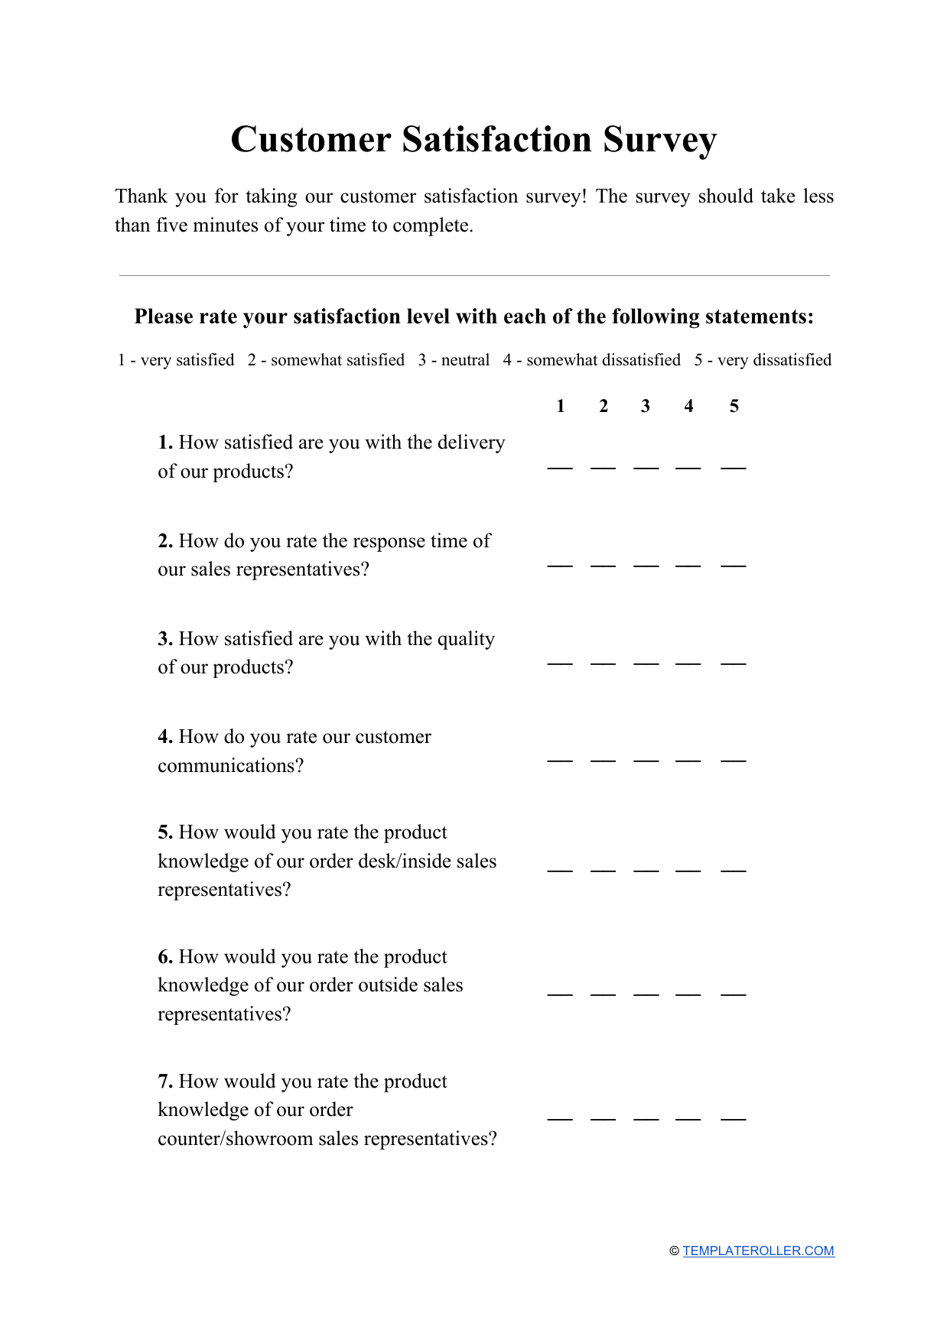 Customer Satisfaction Survey Template, Page 1